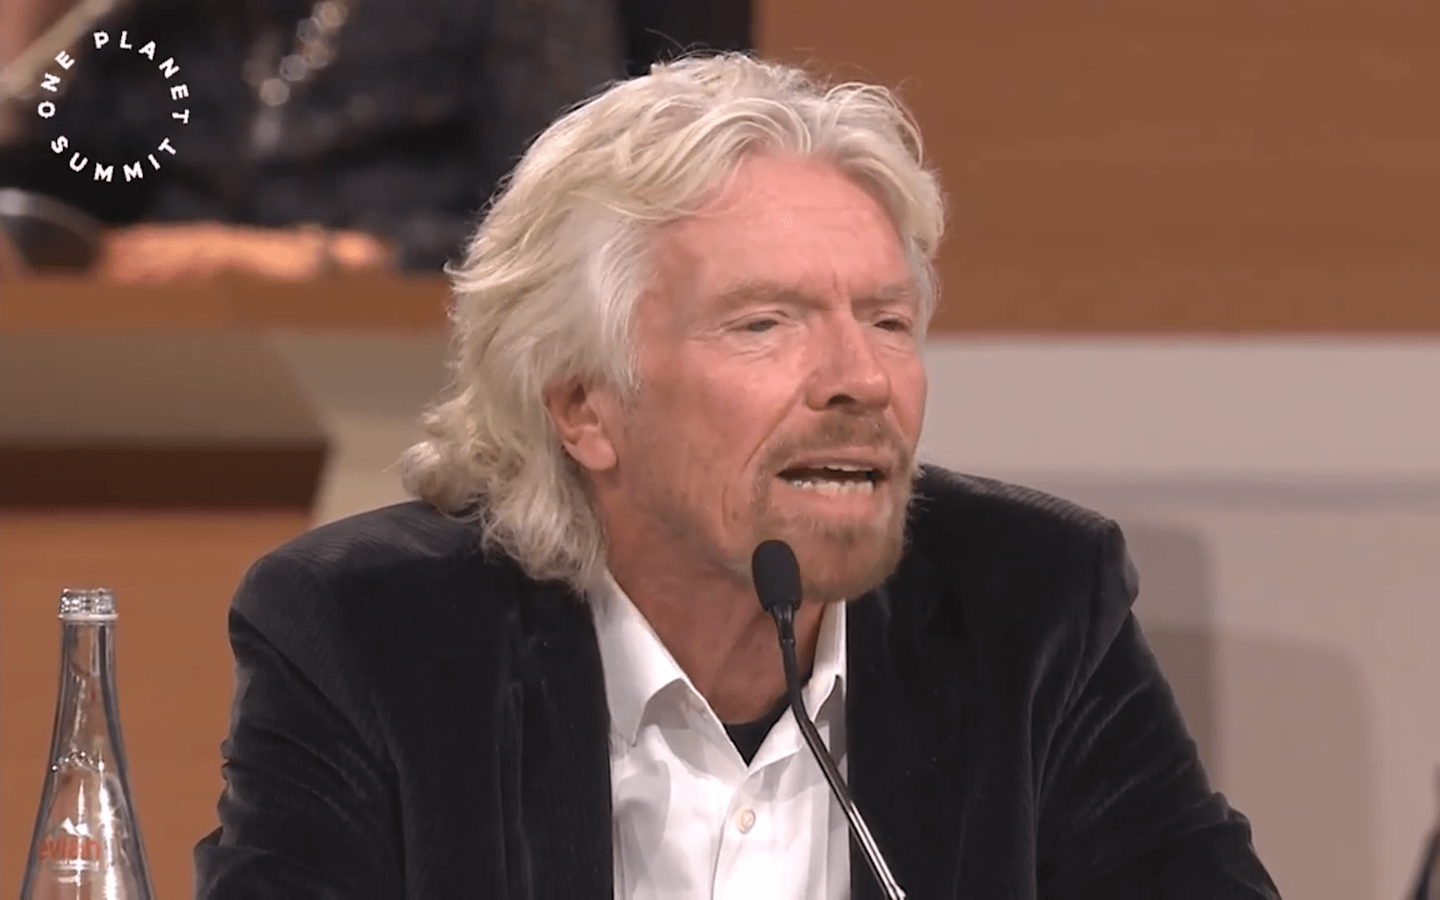 Richard Branson sitting down at a table speaking at the summit